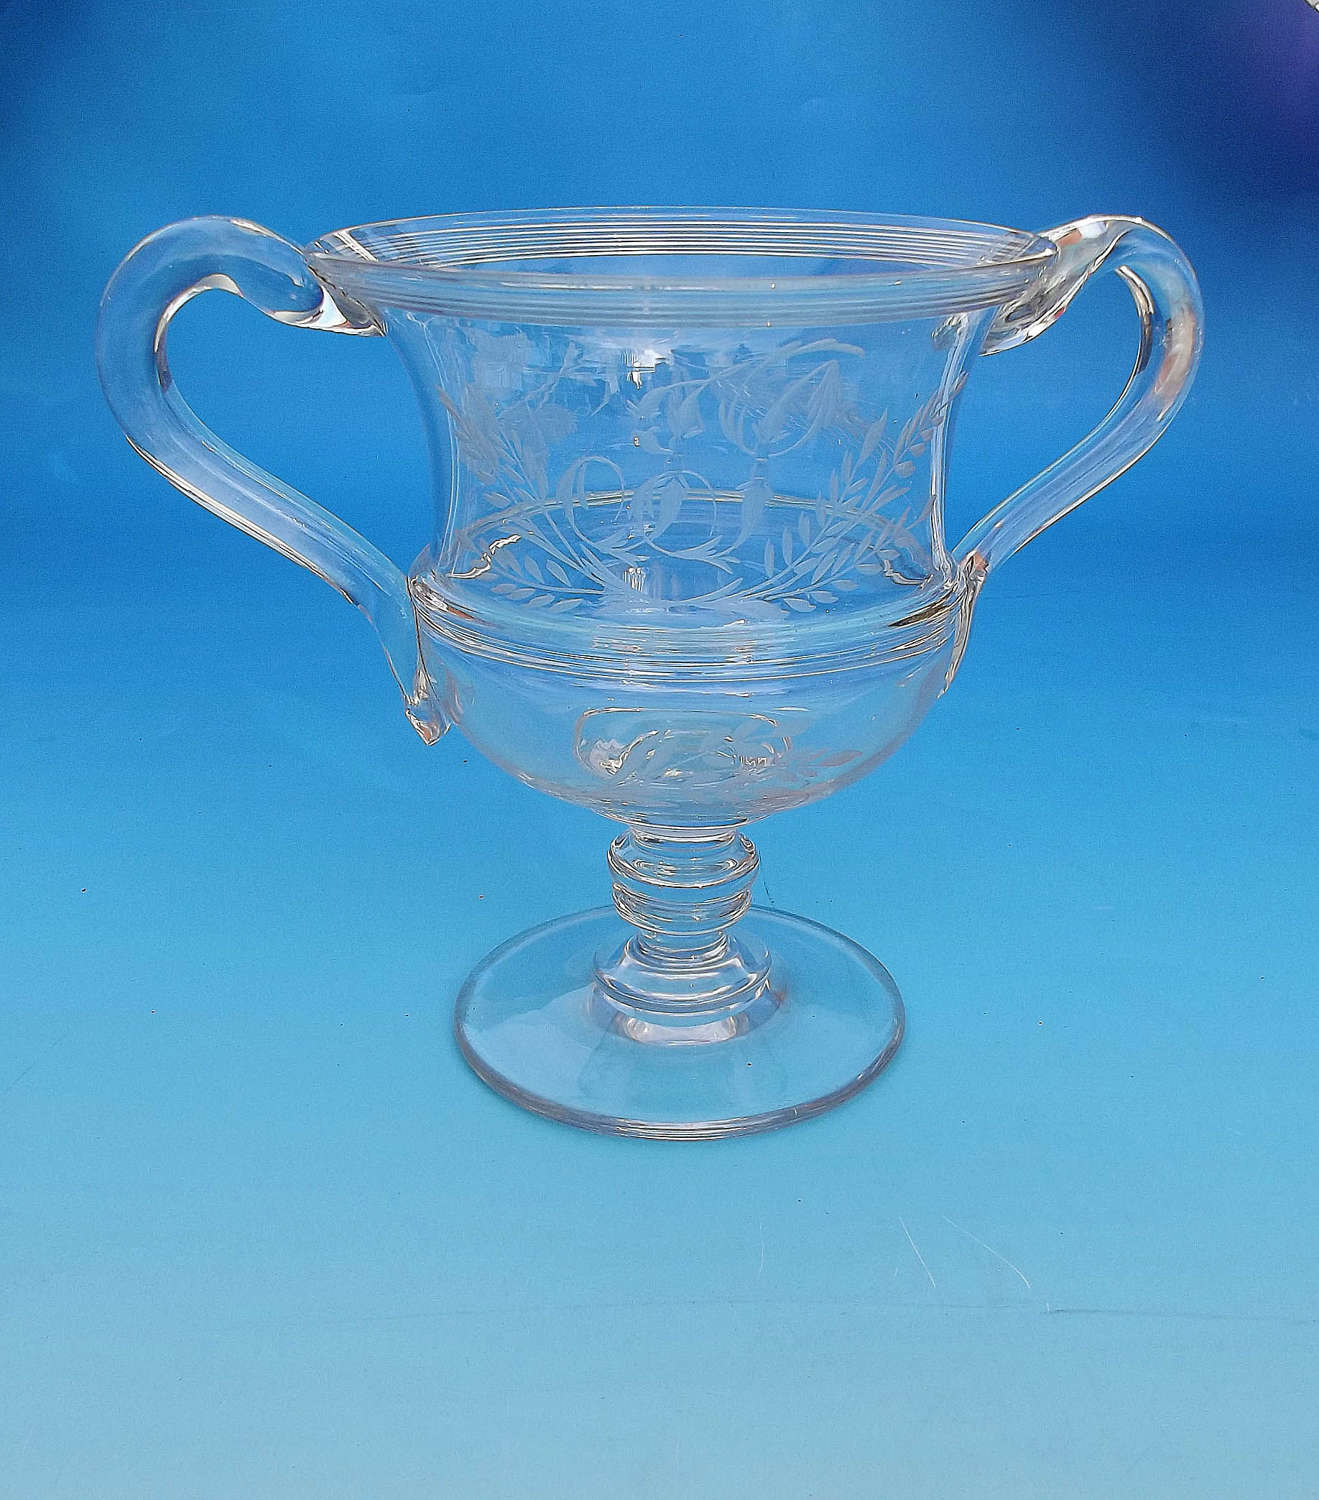 Early 19thc Glassware Engraved Loving Cup . English. C1800-20